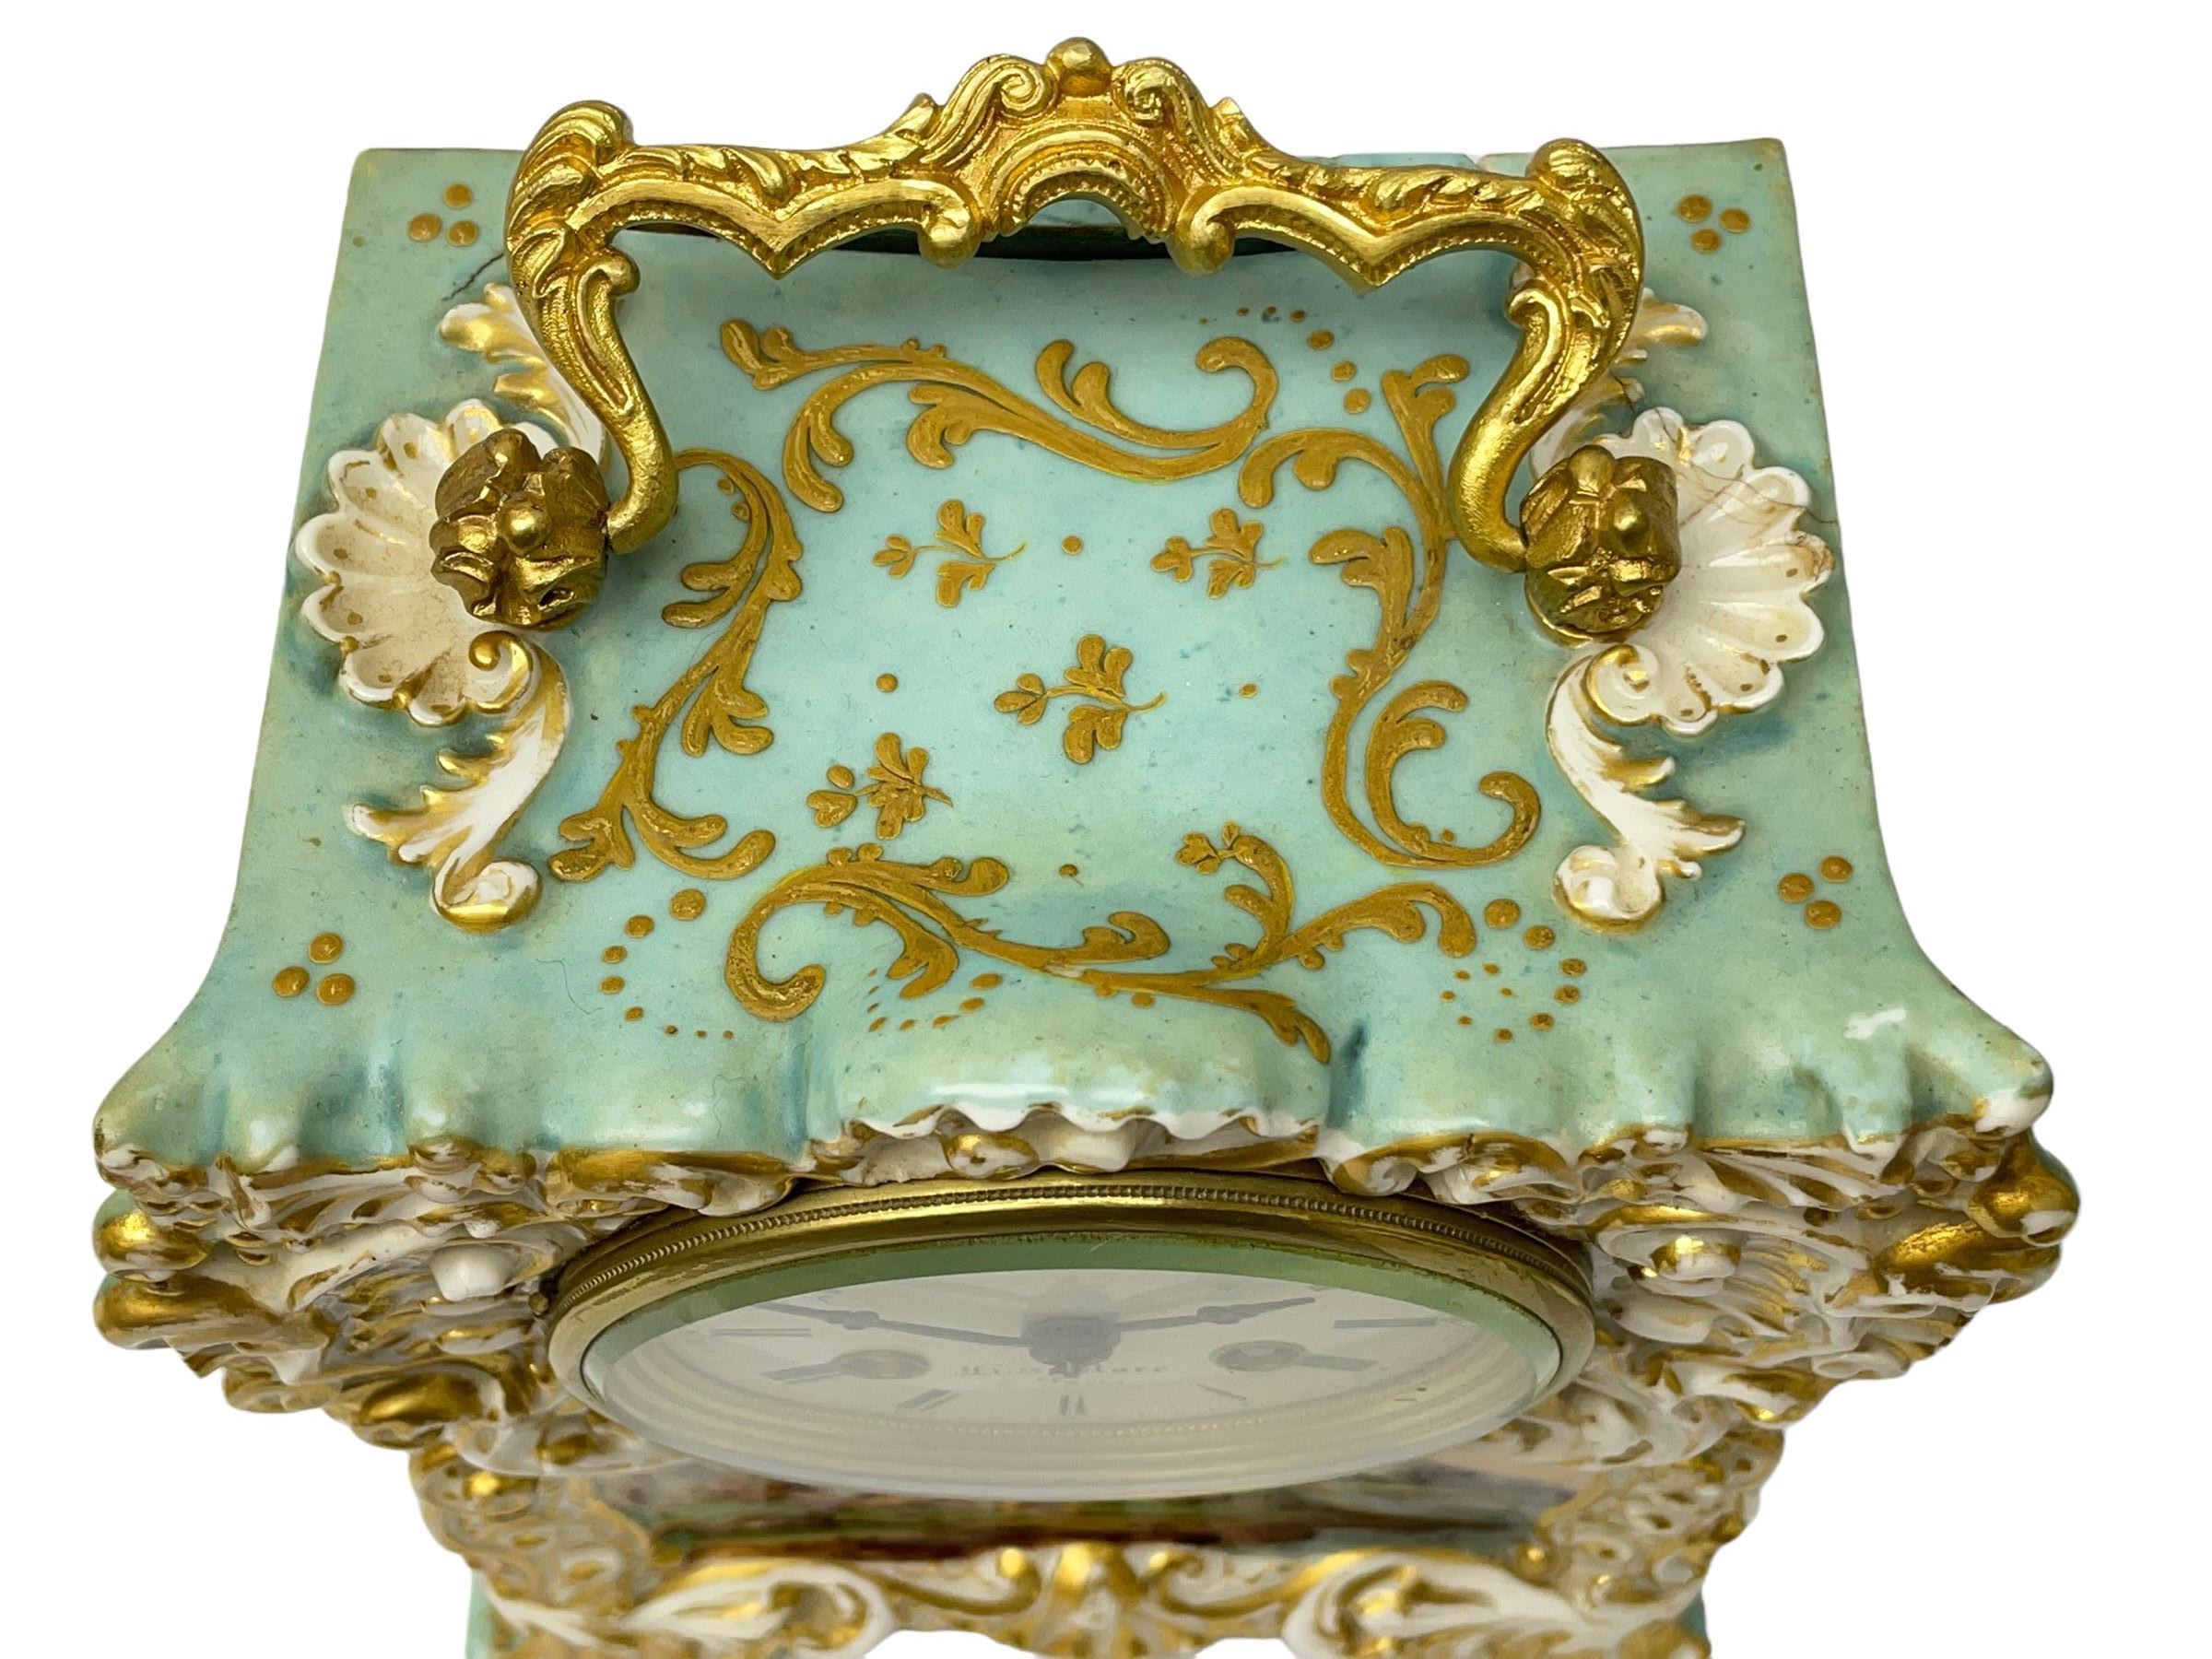 Continental - early 19th century porcelain mantle clock with a French eight-day movement - Image 6 of 8